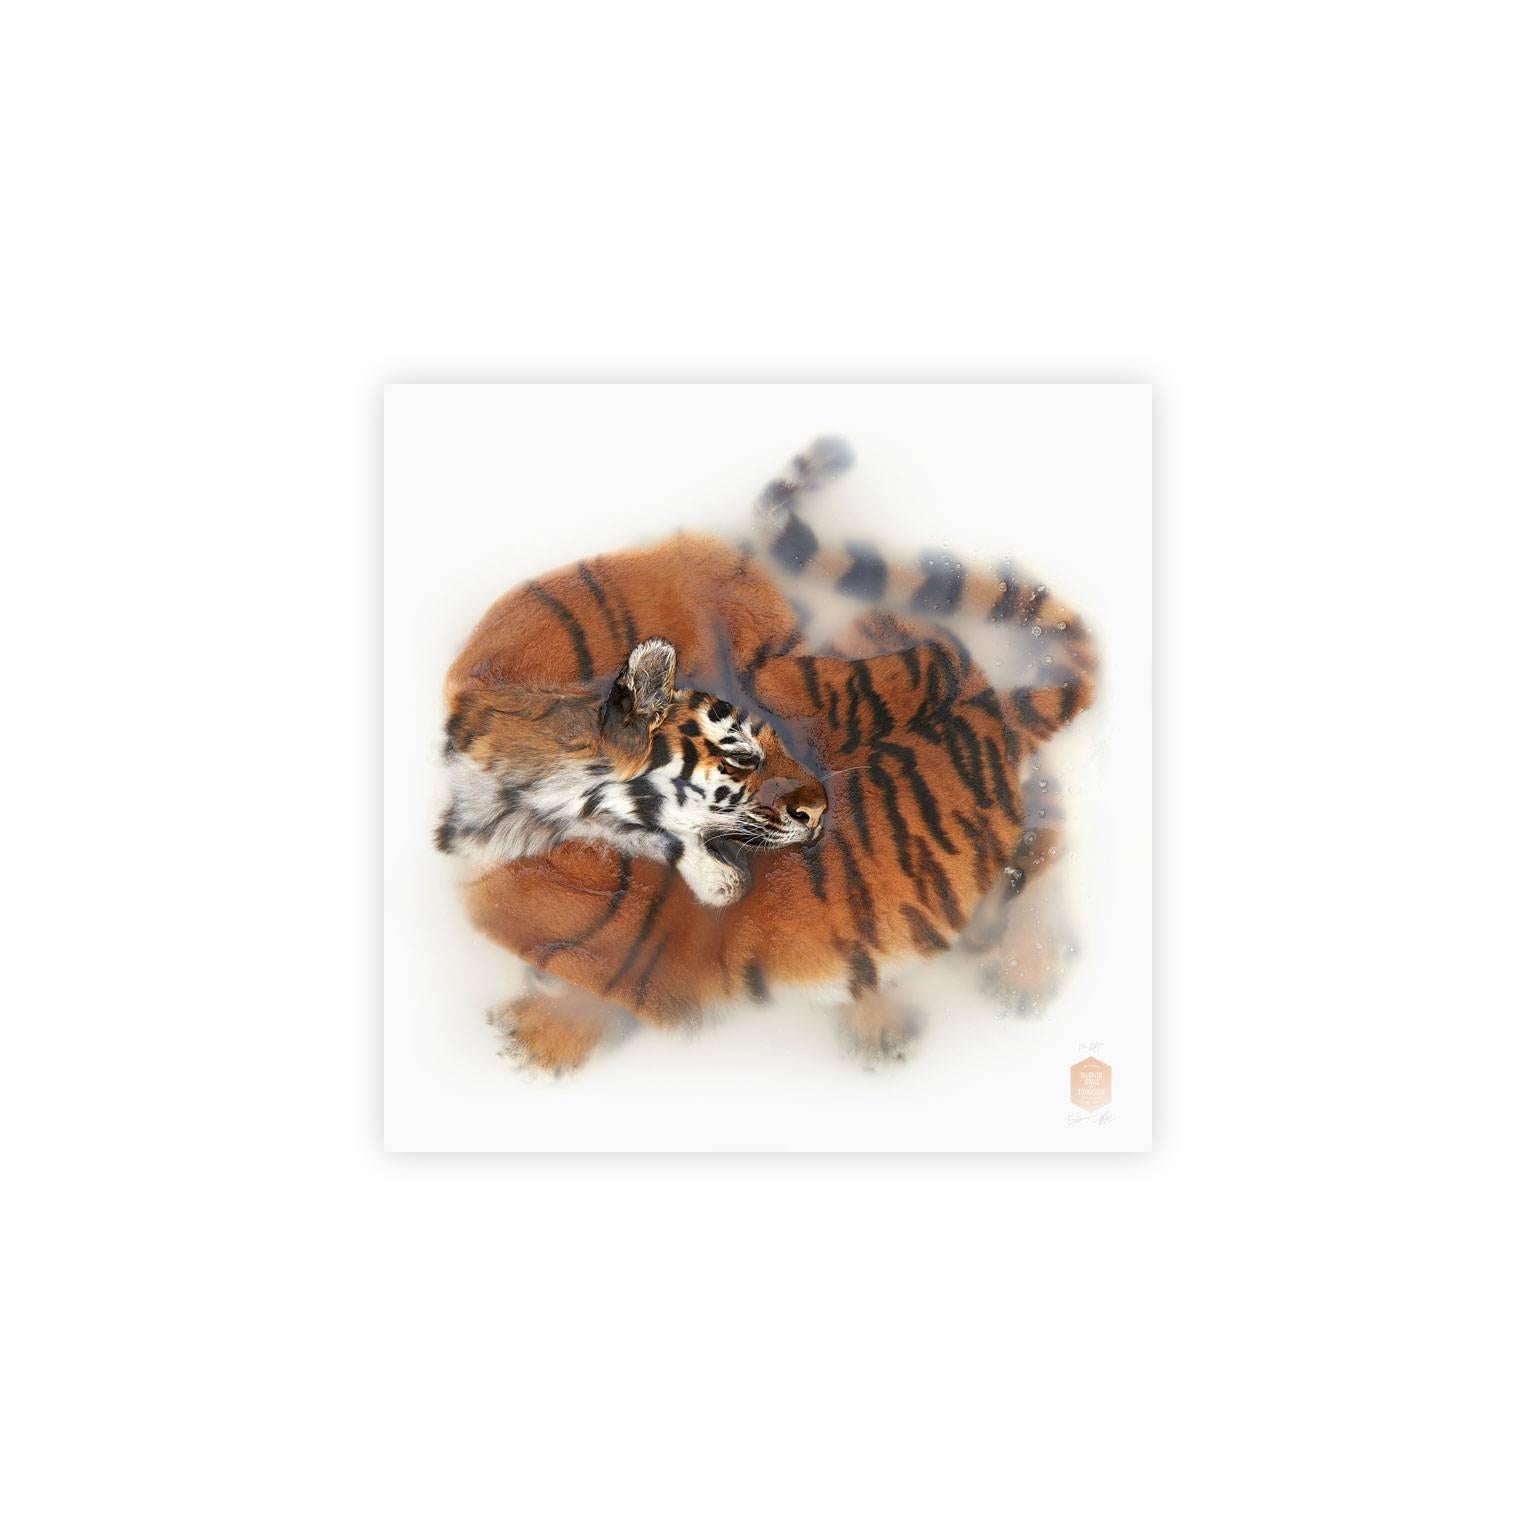 Unknown pose by Amur Tiger is nr. 3/10.

Size:
160 x 160 cm (63 x 63 in).
Size framed (optional).
174 x 174 cm (68.5 x 68.5 in).
 
Medium
Giclée Fine Art print on Hahnemuehle photo rag ultra smooth.

About the Artists:
Jaap Sinke (1973),